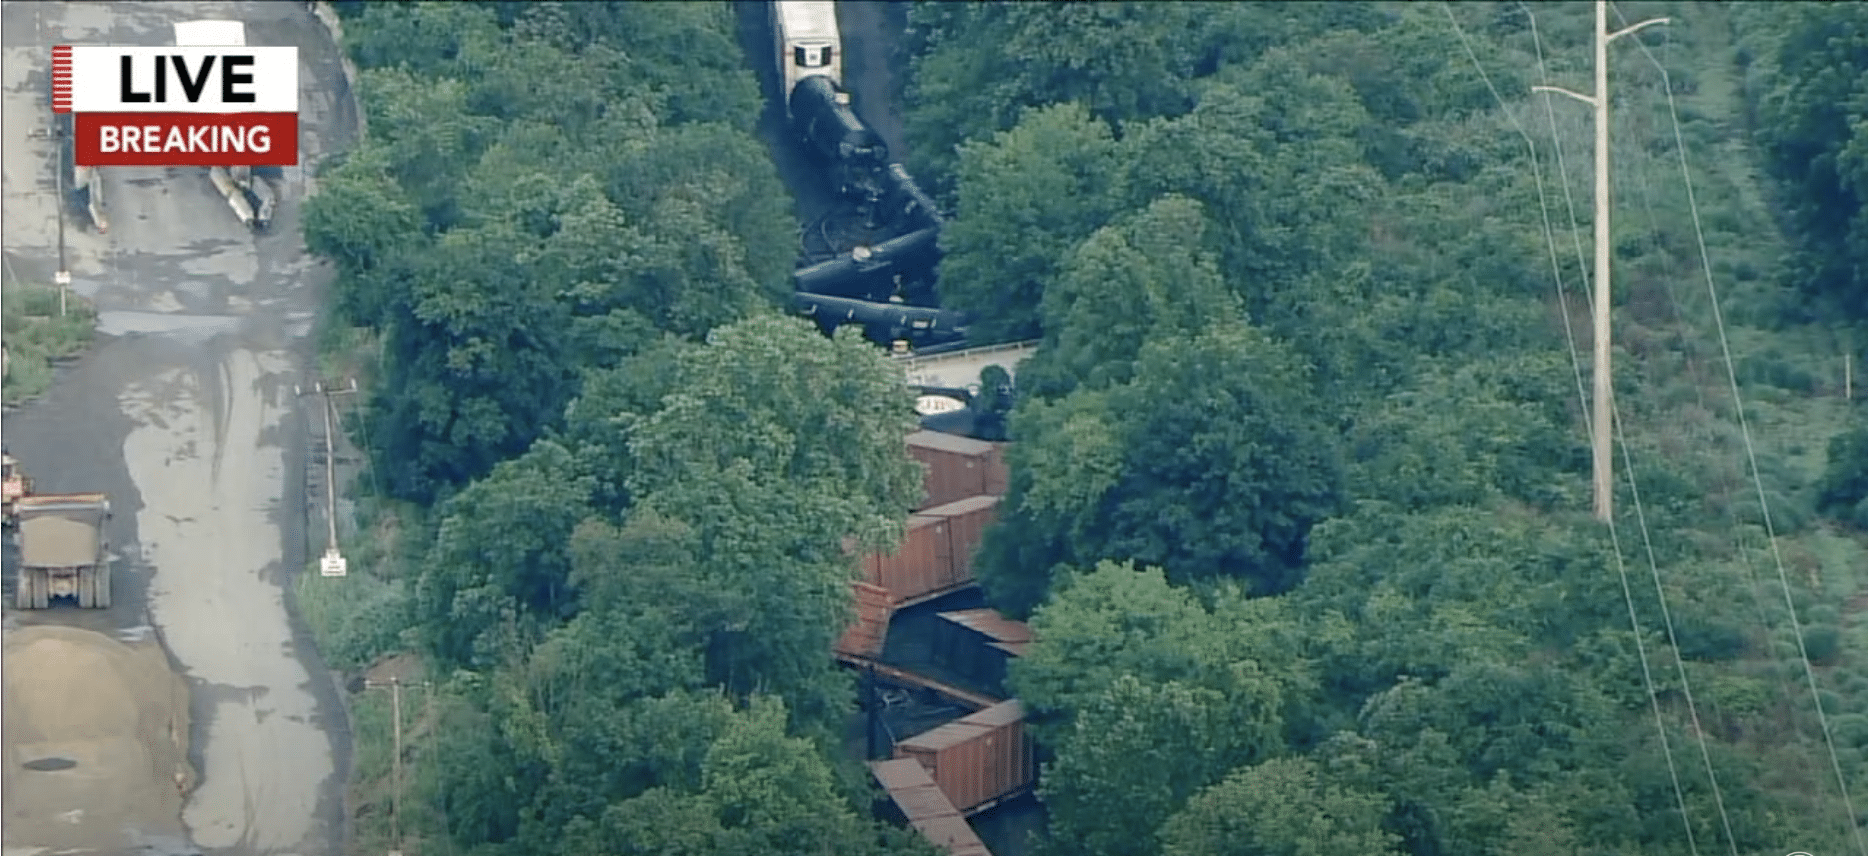 Freight train derailment in Pennsylvania prompts evacuations of nearby residents, and businesses